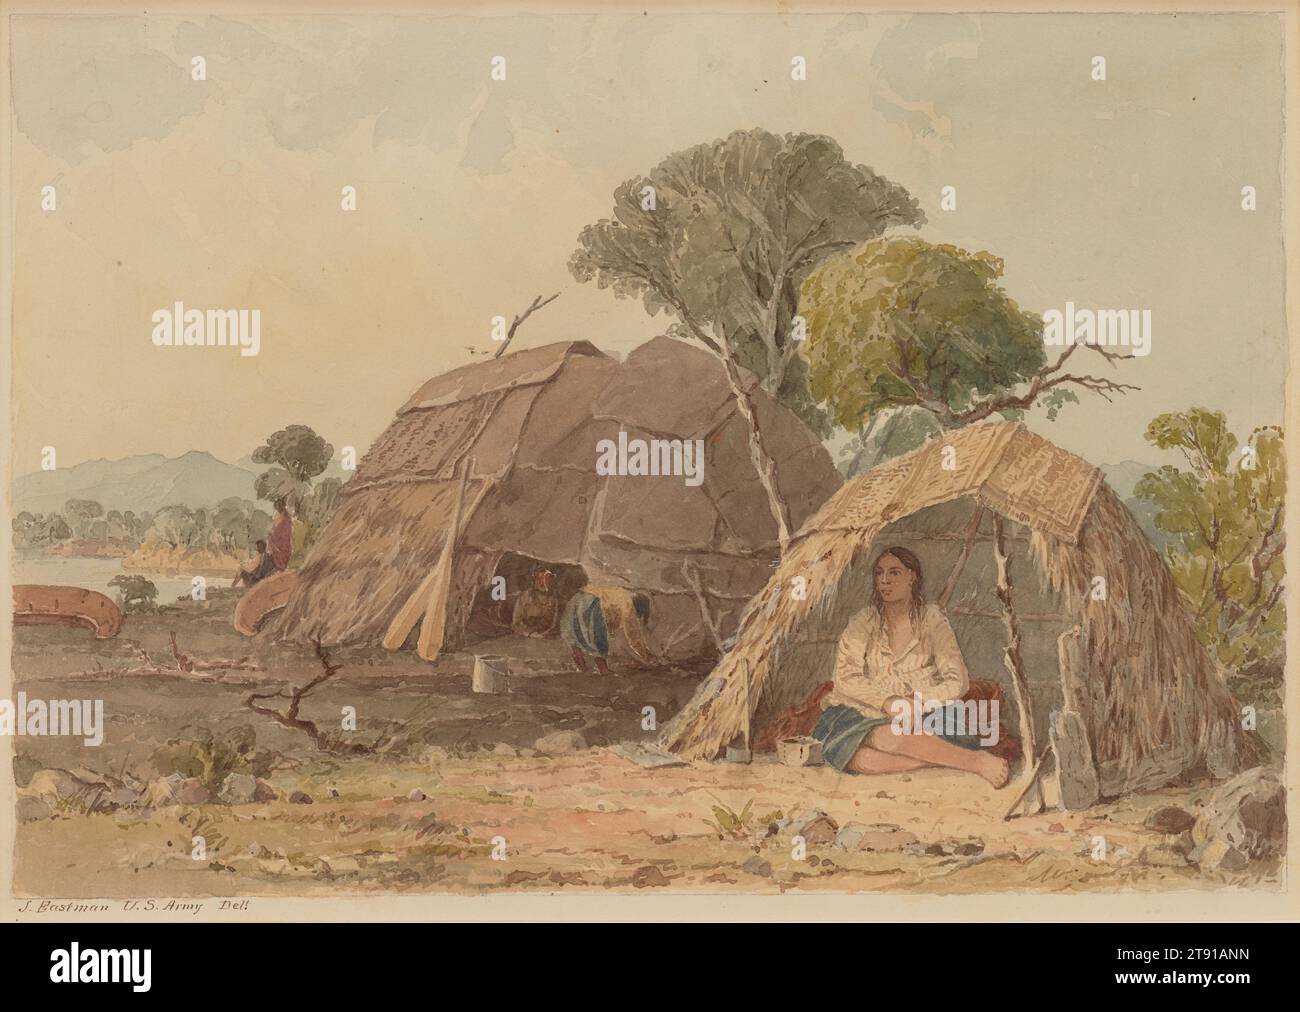 Menstrual Lodge, 1849-1855, Seth Eastman, American, 1808–1875, 6 7/8 × 9 7/8 in. (17.46 × 25.08 cm) (image)9 1/2 × 12 7/16 in. (24.13 × 31.59 cm) (sheet), Watercolor, United States, 19th century, U.S. Army Captain Seth Eastman was a trained artist who served twice on the frontier at Minnesota’s Fort Snelling, from 1830 to 1832 and again from 1841 to 1848. His extensive firsthand, peaceful encounters with Native Americans gave him extraordinary opportunities to observe their customs and practices, which he documented in his art. Stock Photo